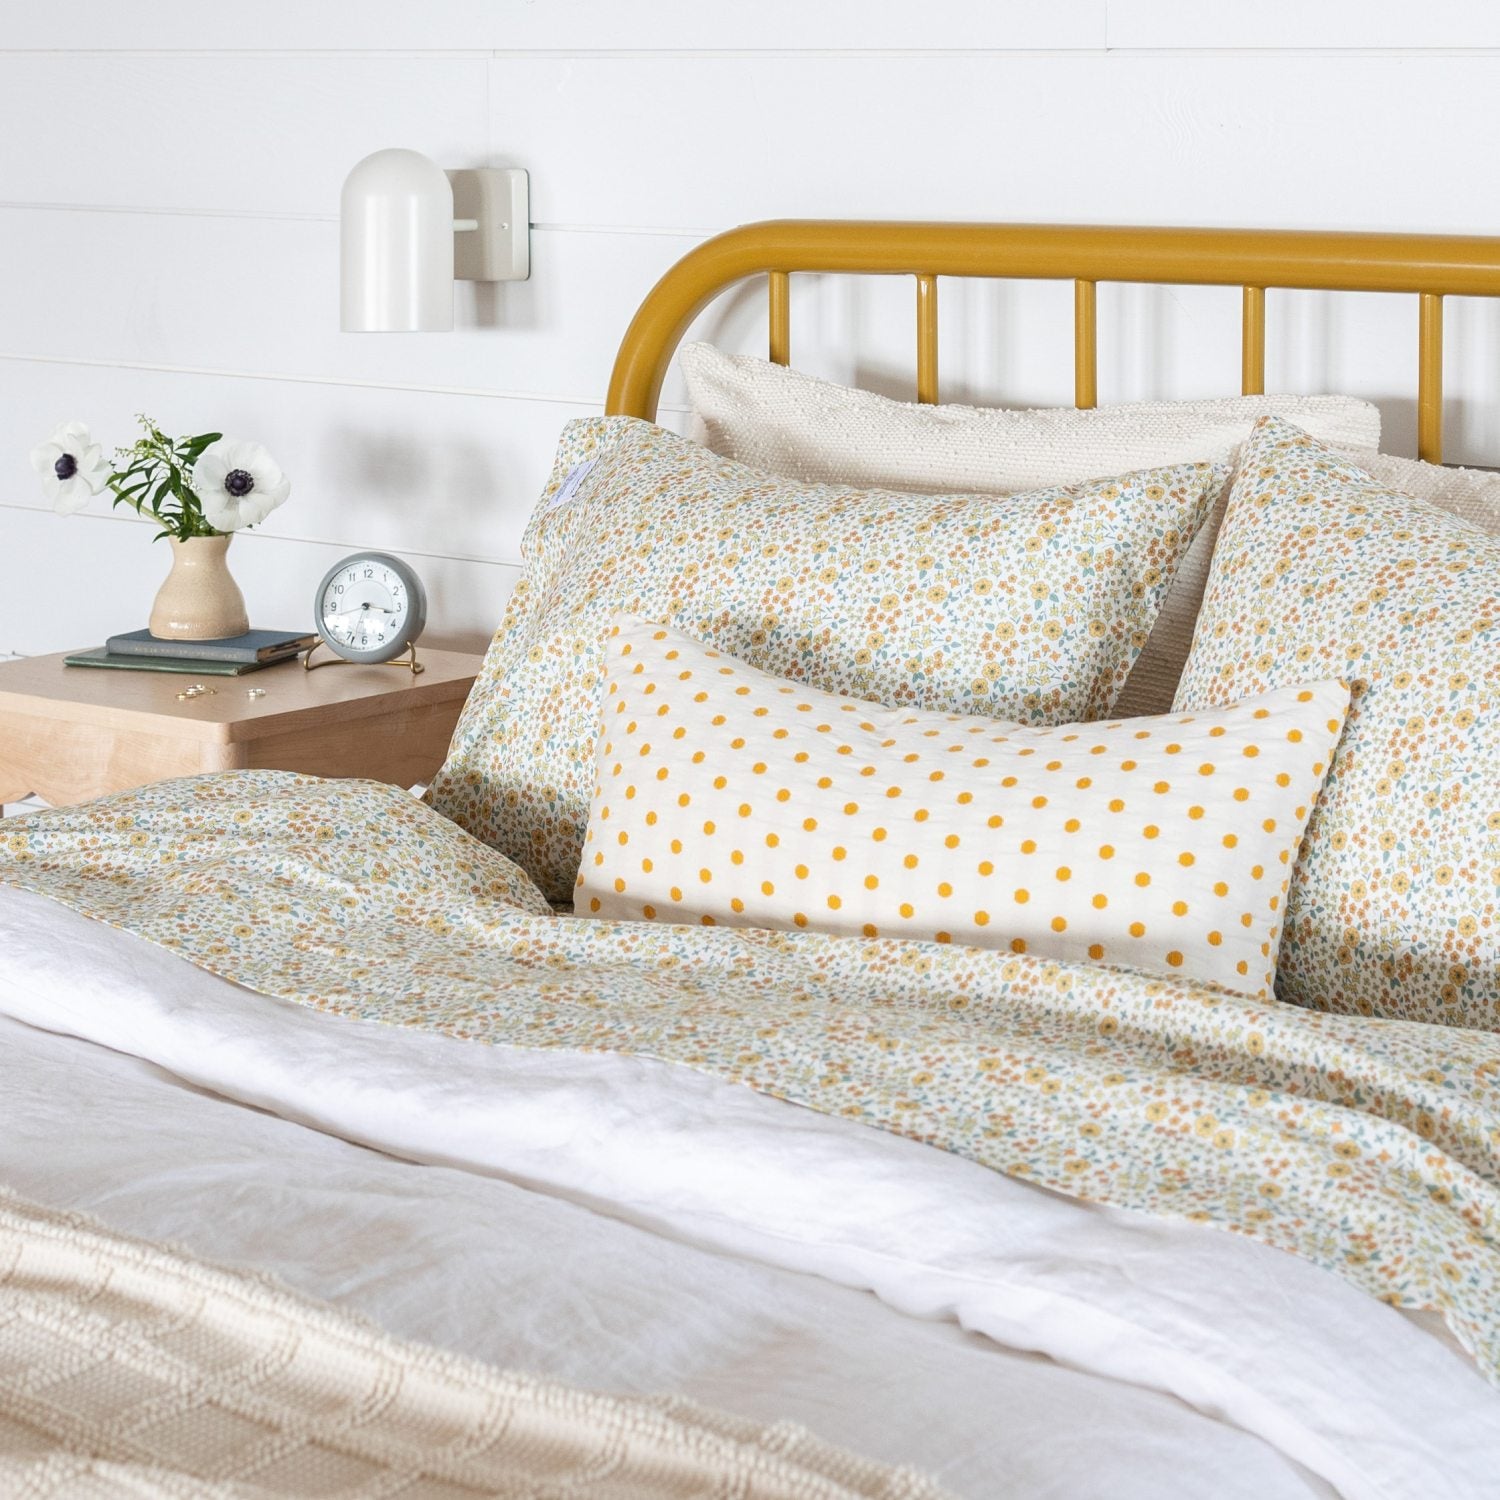 Floral bedding on metal wire frame bed. 